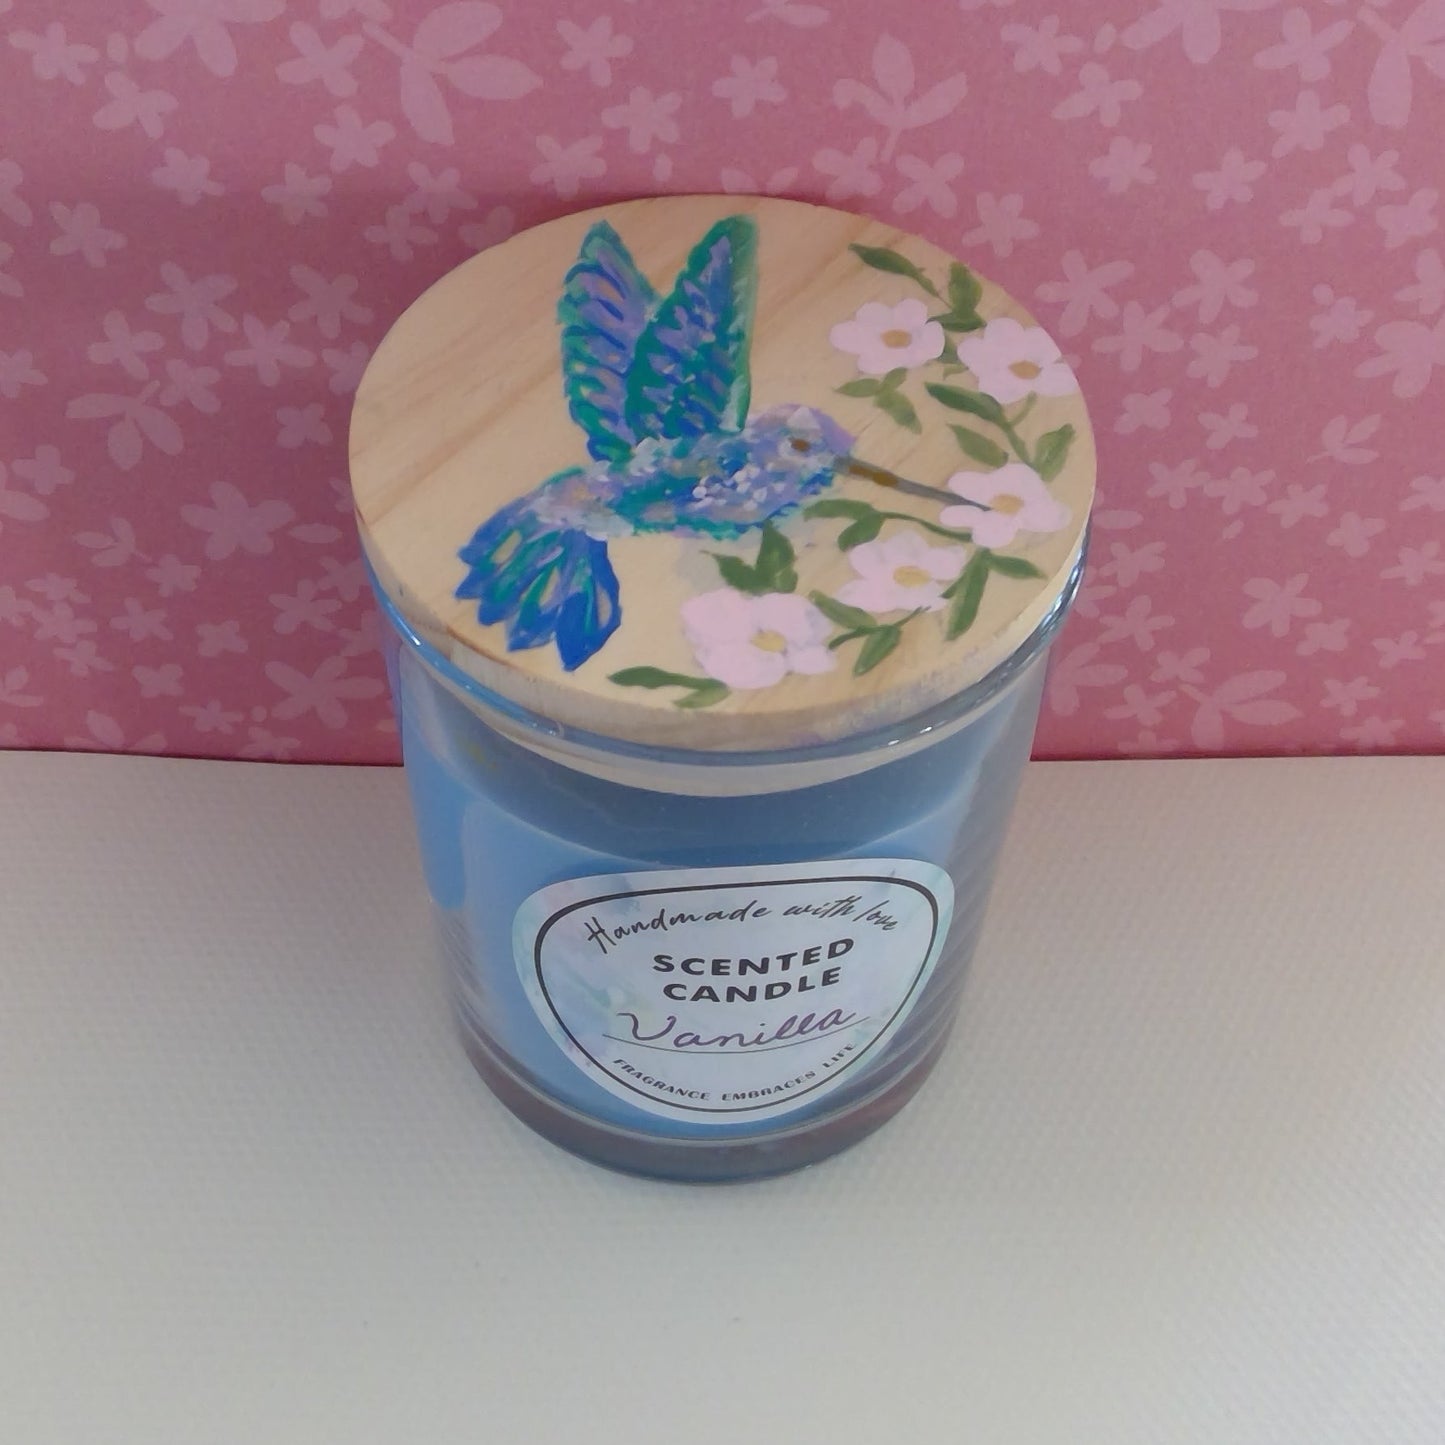 Painted Vanilla Candle